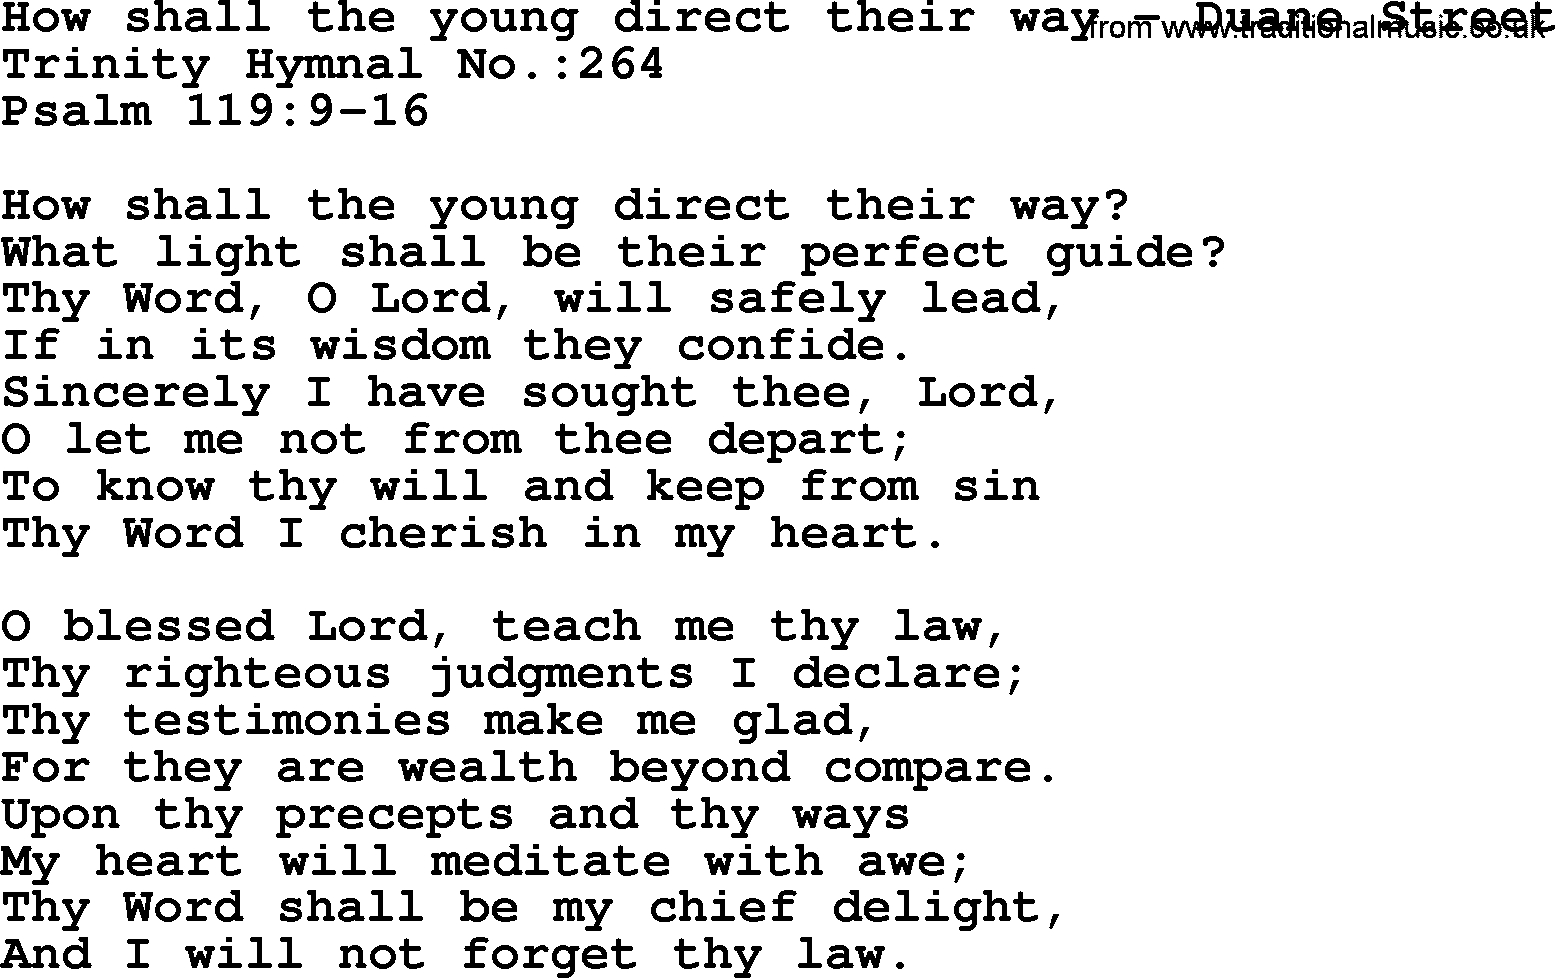 Trinity Hymnal Hymn: How Shall The Young Direct Their Way--Duane Street, lyrics with midi music